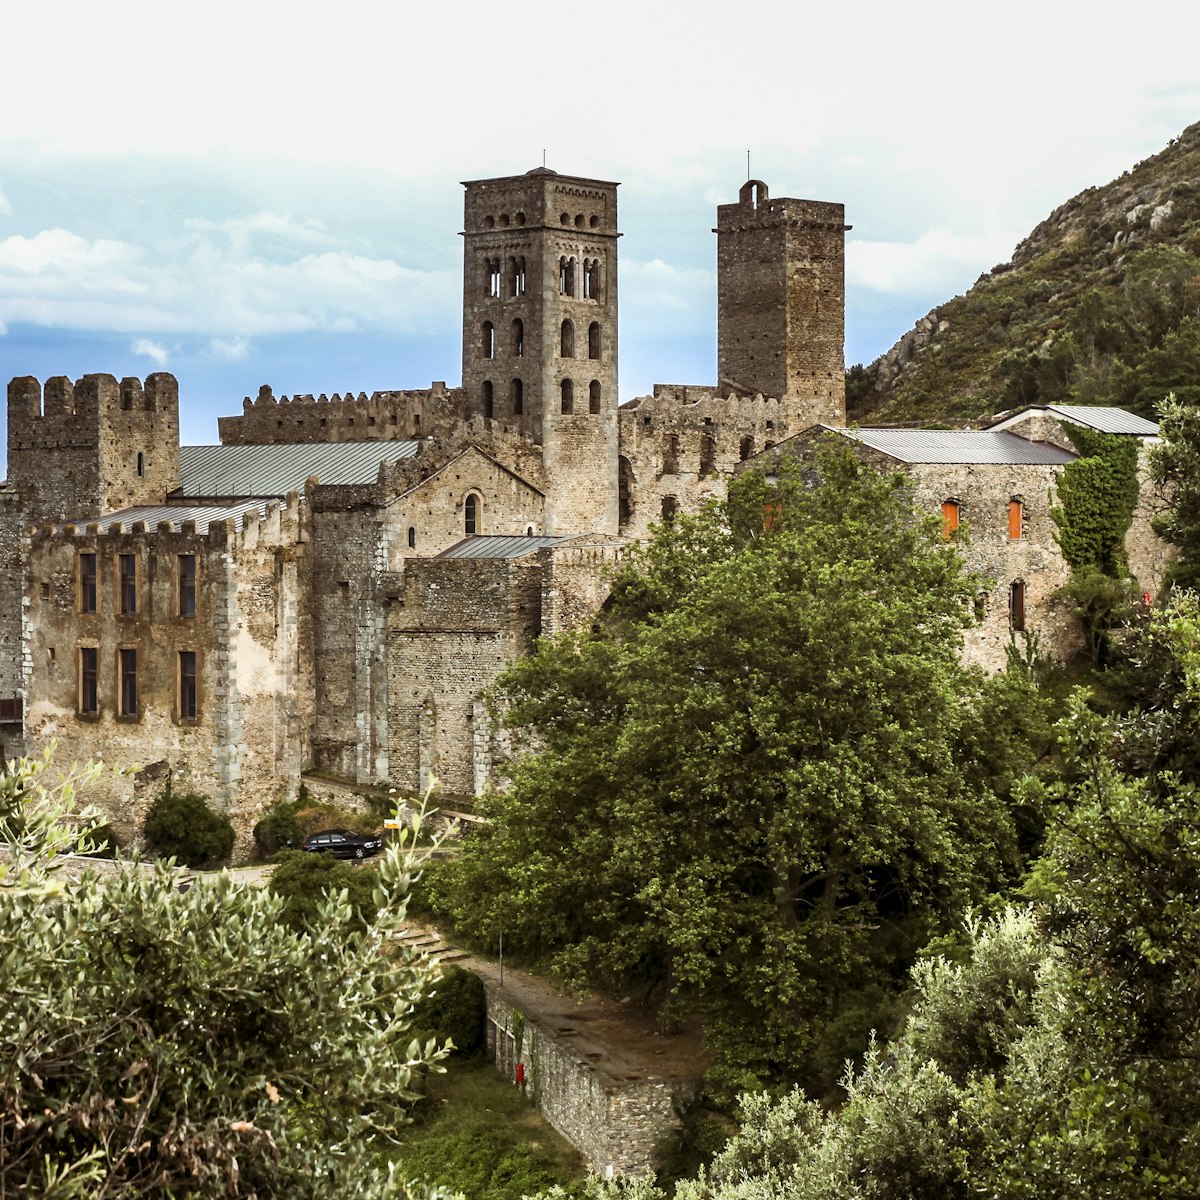 The Monastery of Sant Pere de Rodes.
